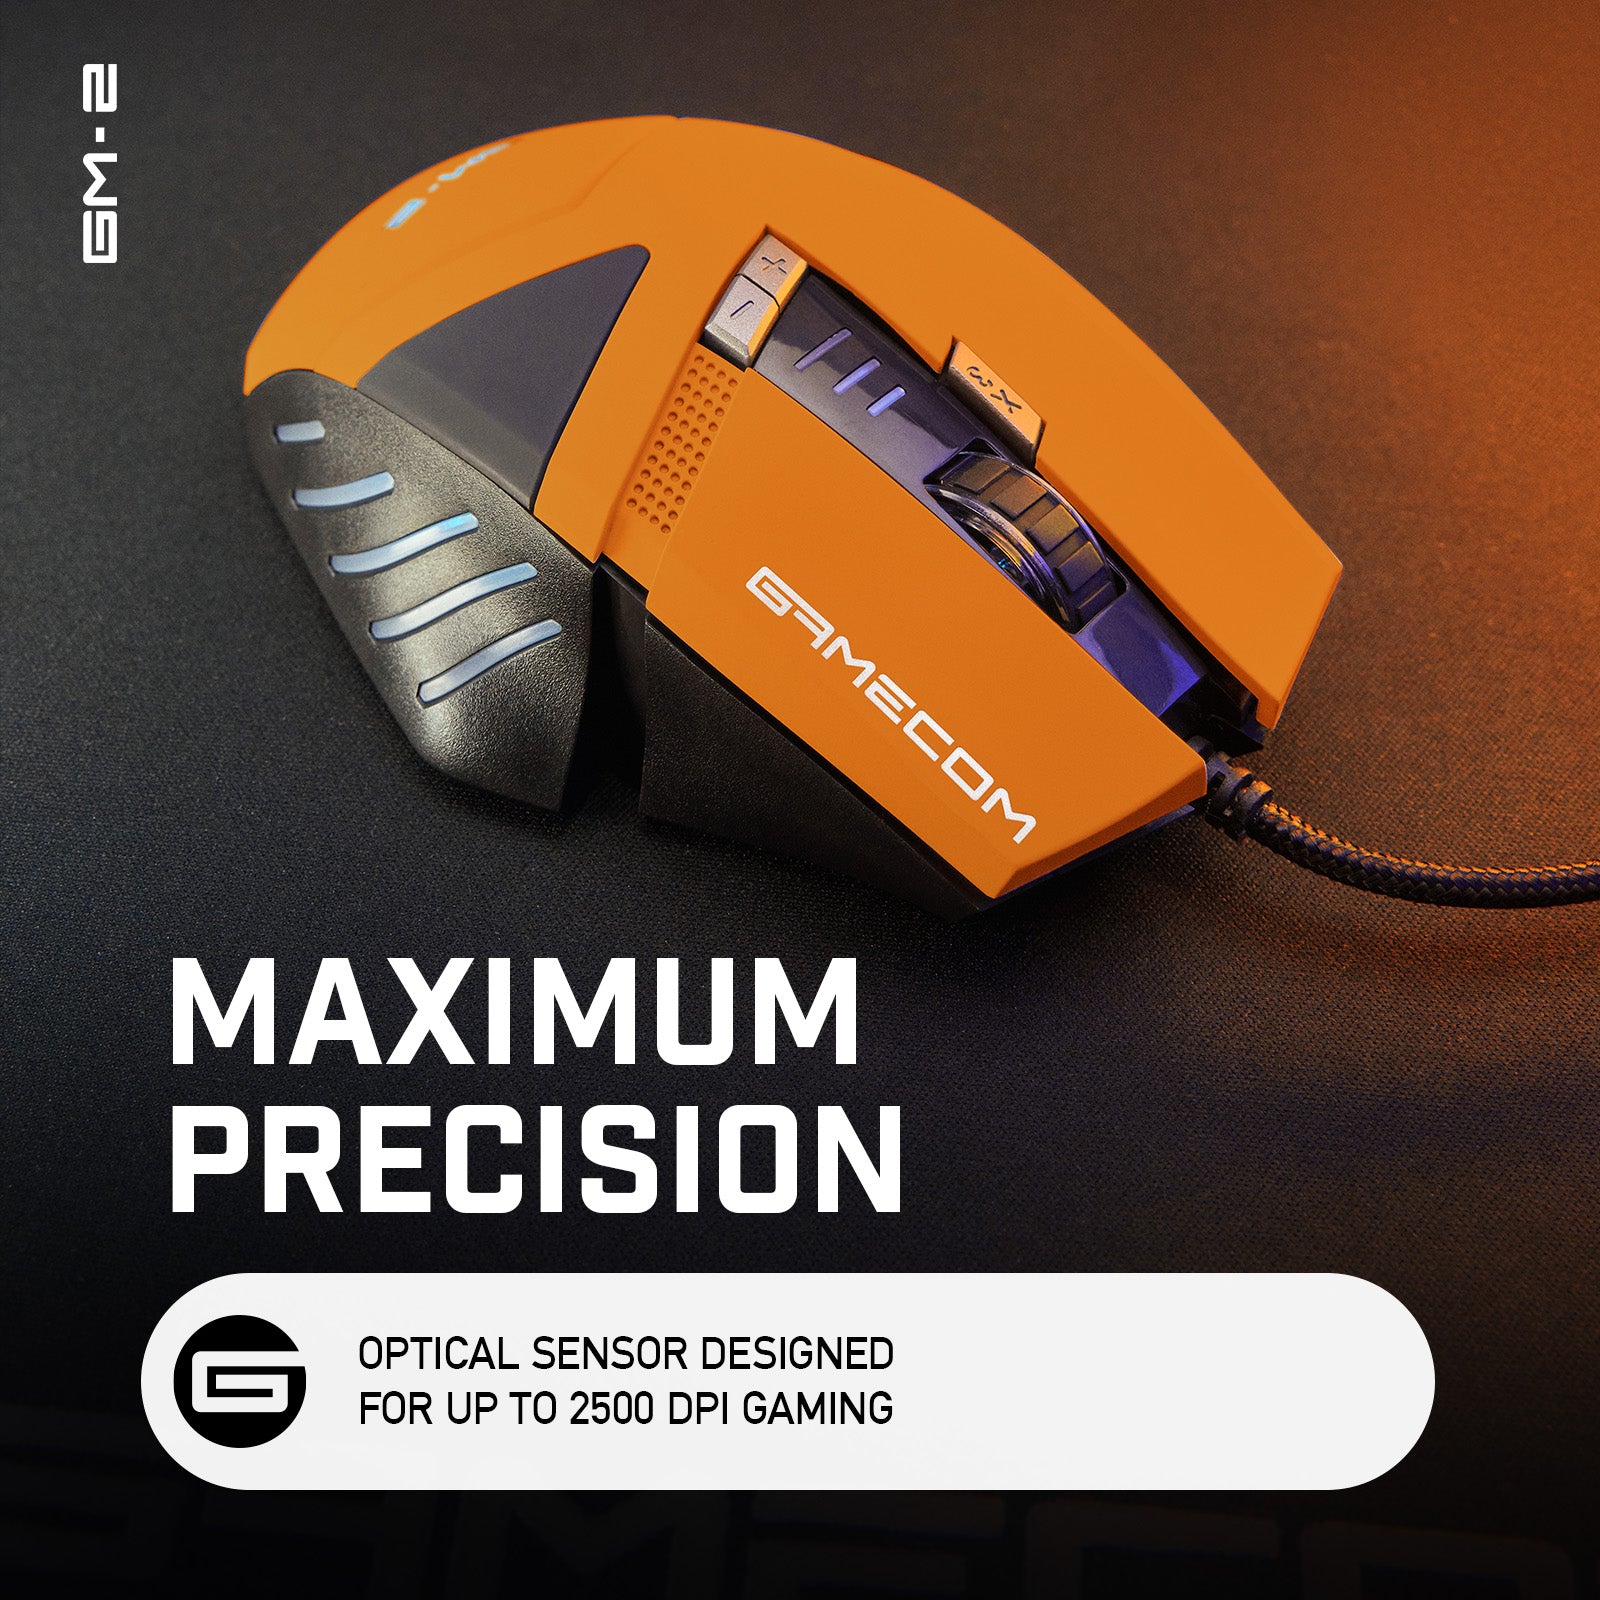 GM-2 ADVANCED GAMING MOUSE - Launch Edition Orange